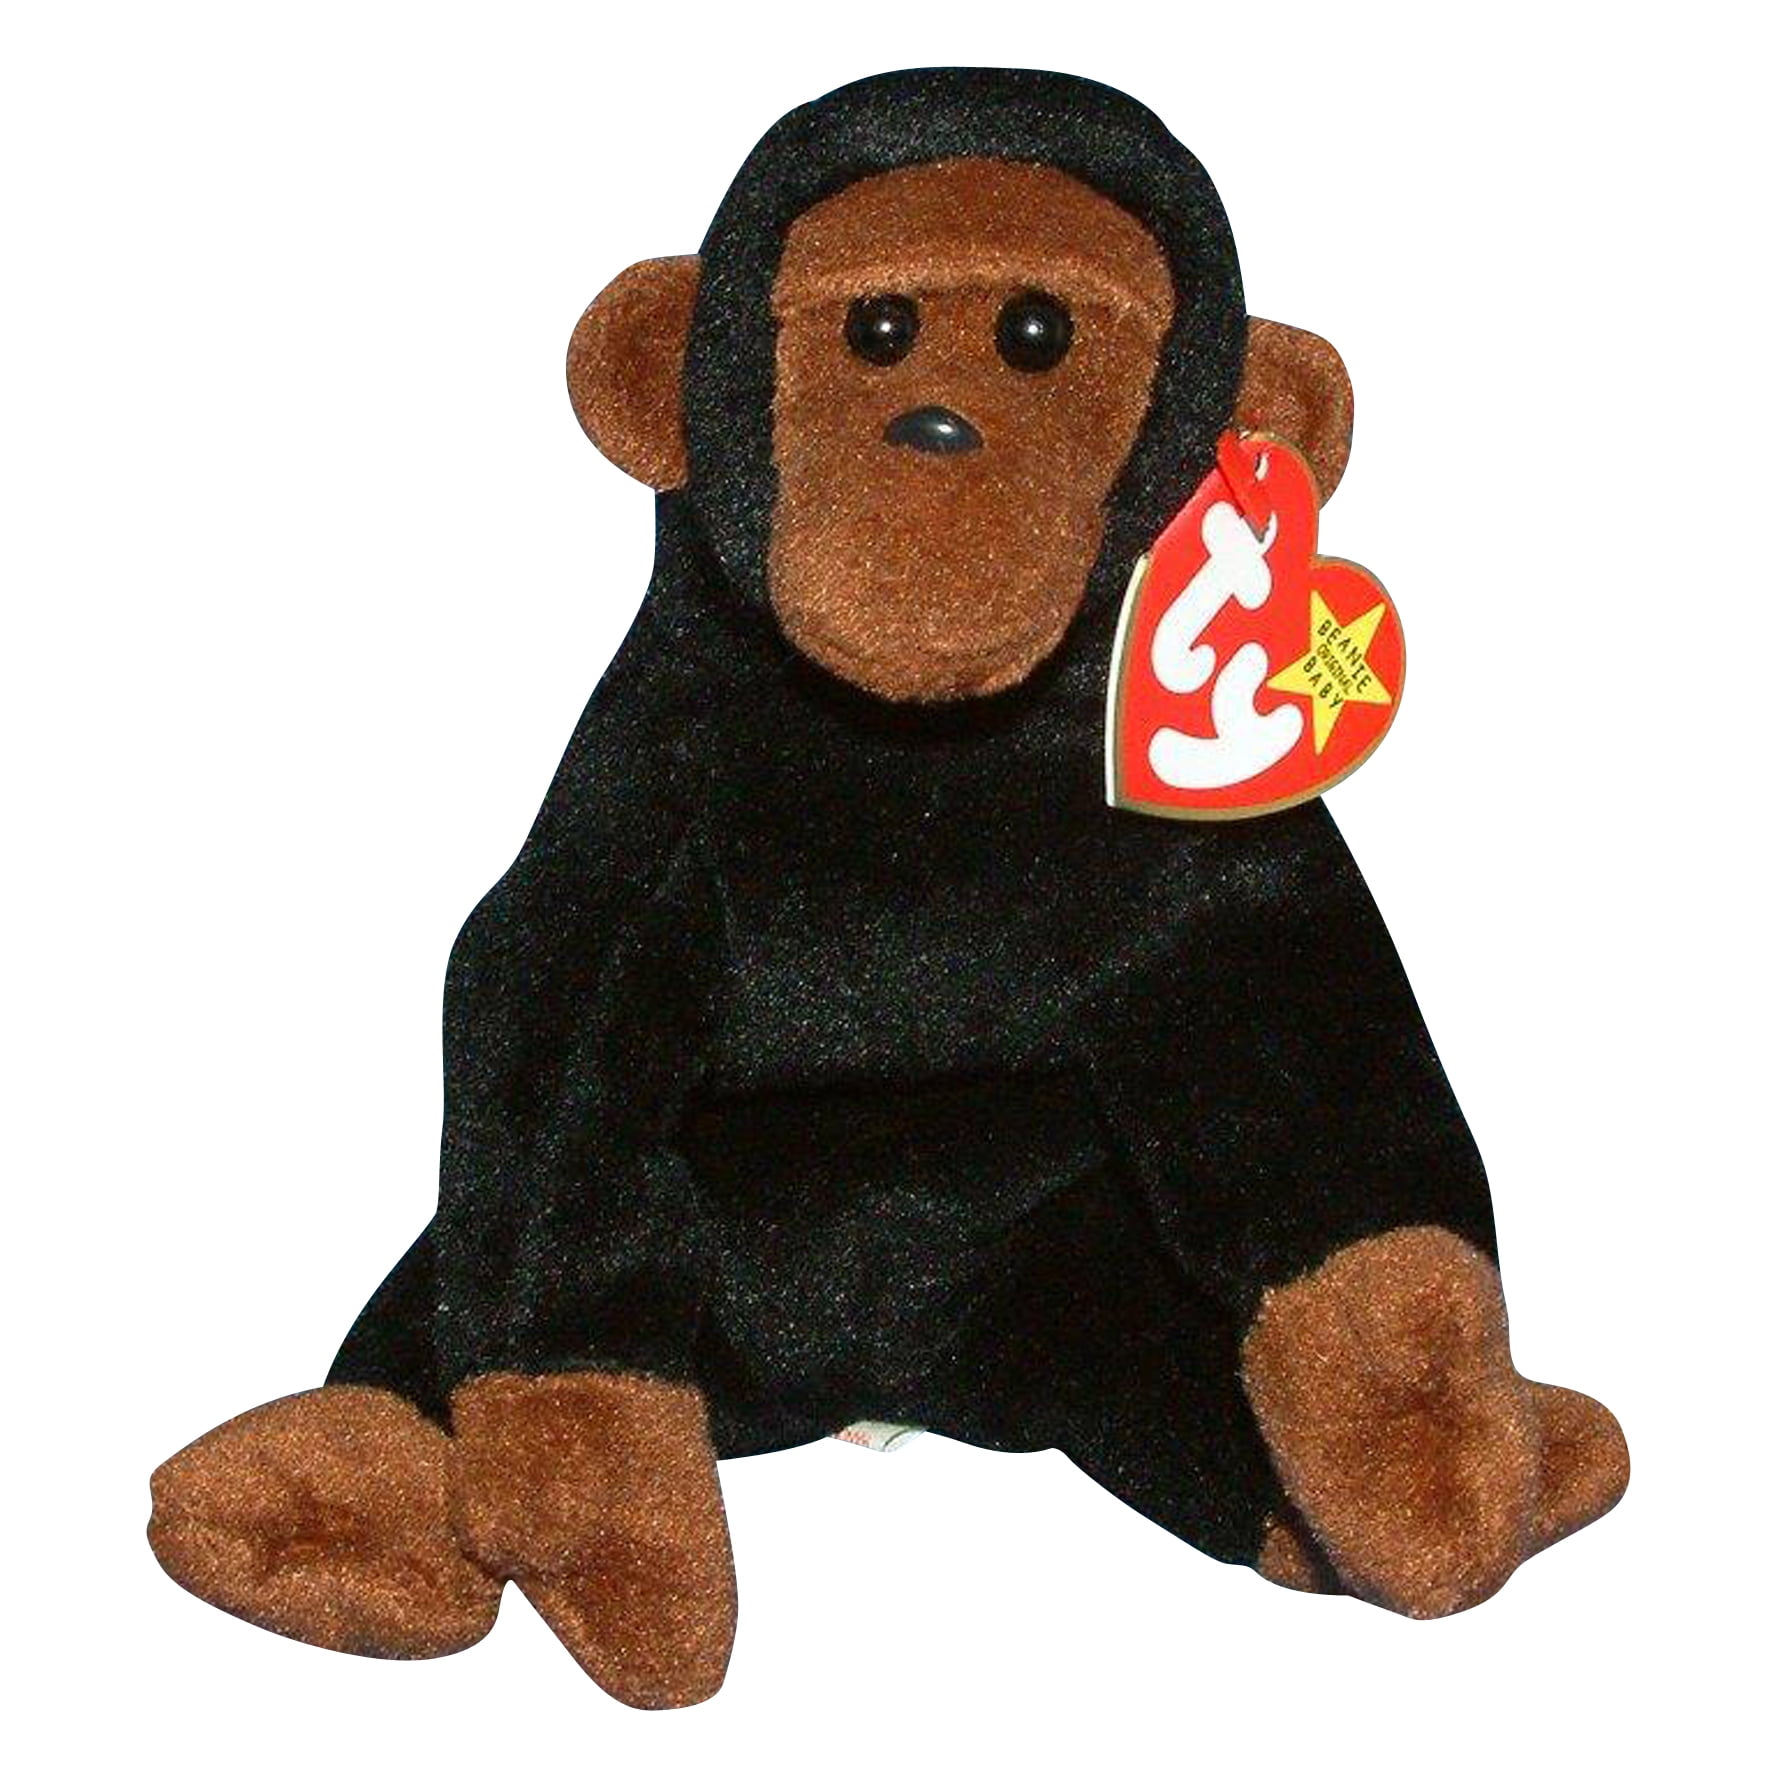 Ty Beanie Baby Congo the Gorilla Plush Toy 4160 for sale online 